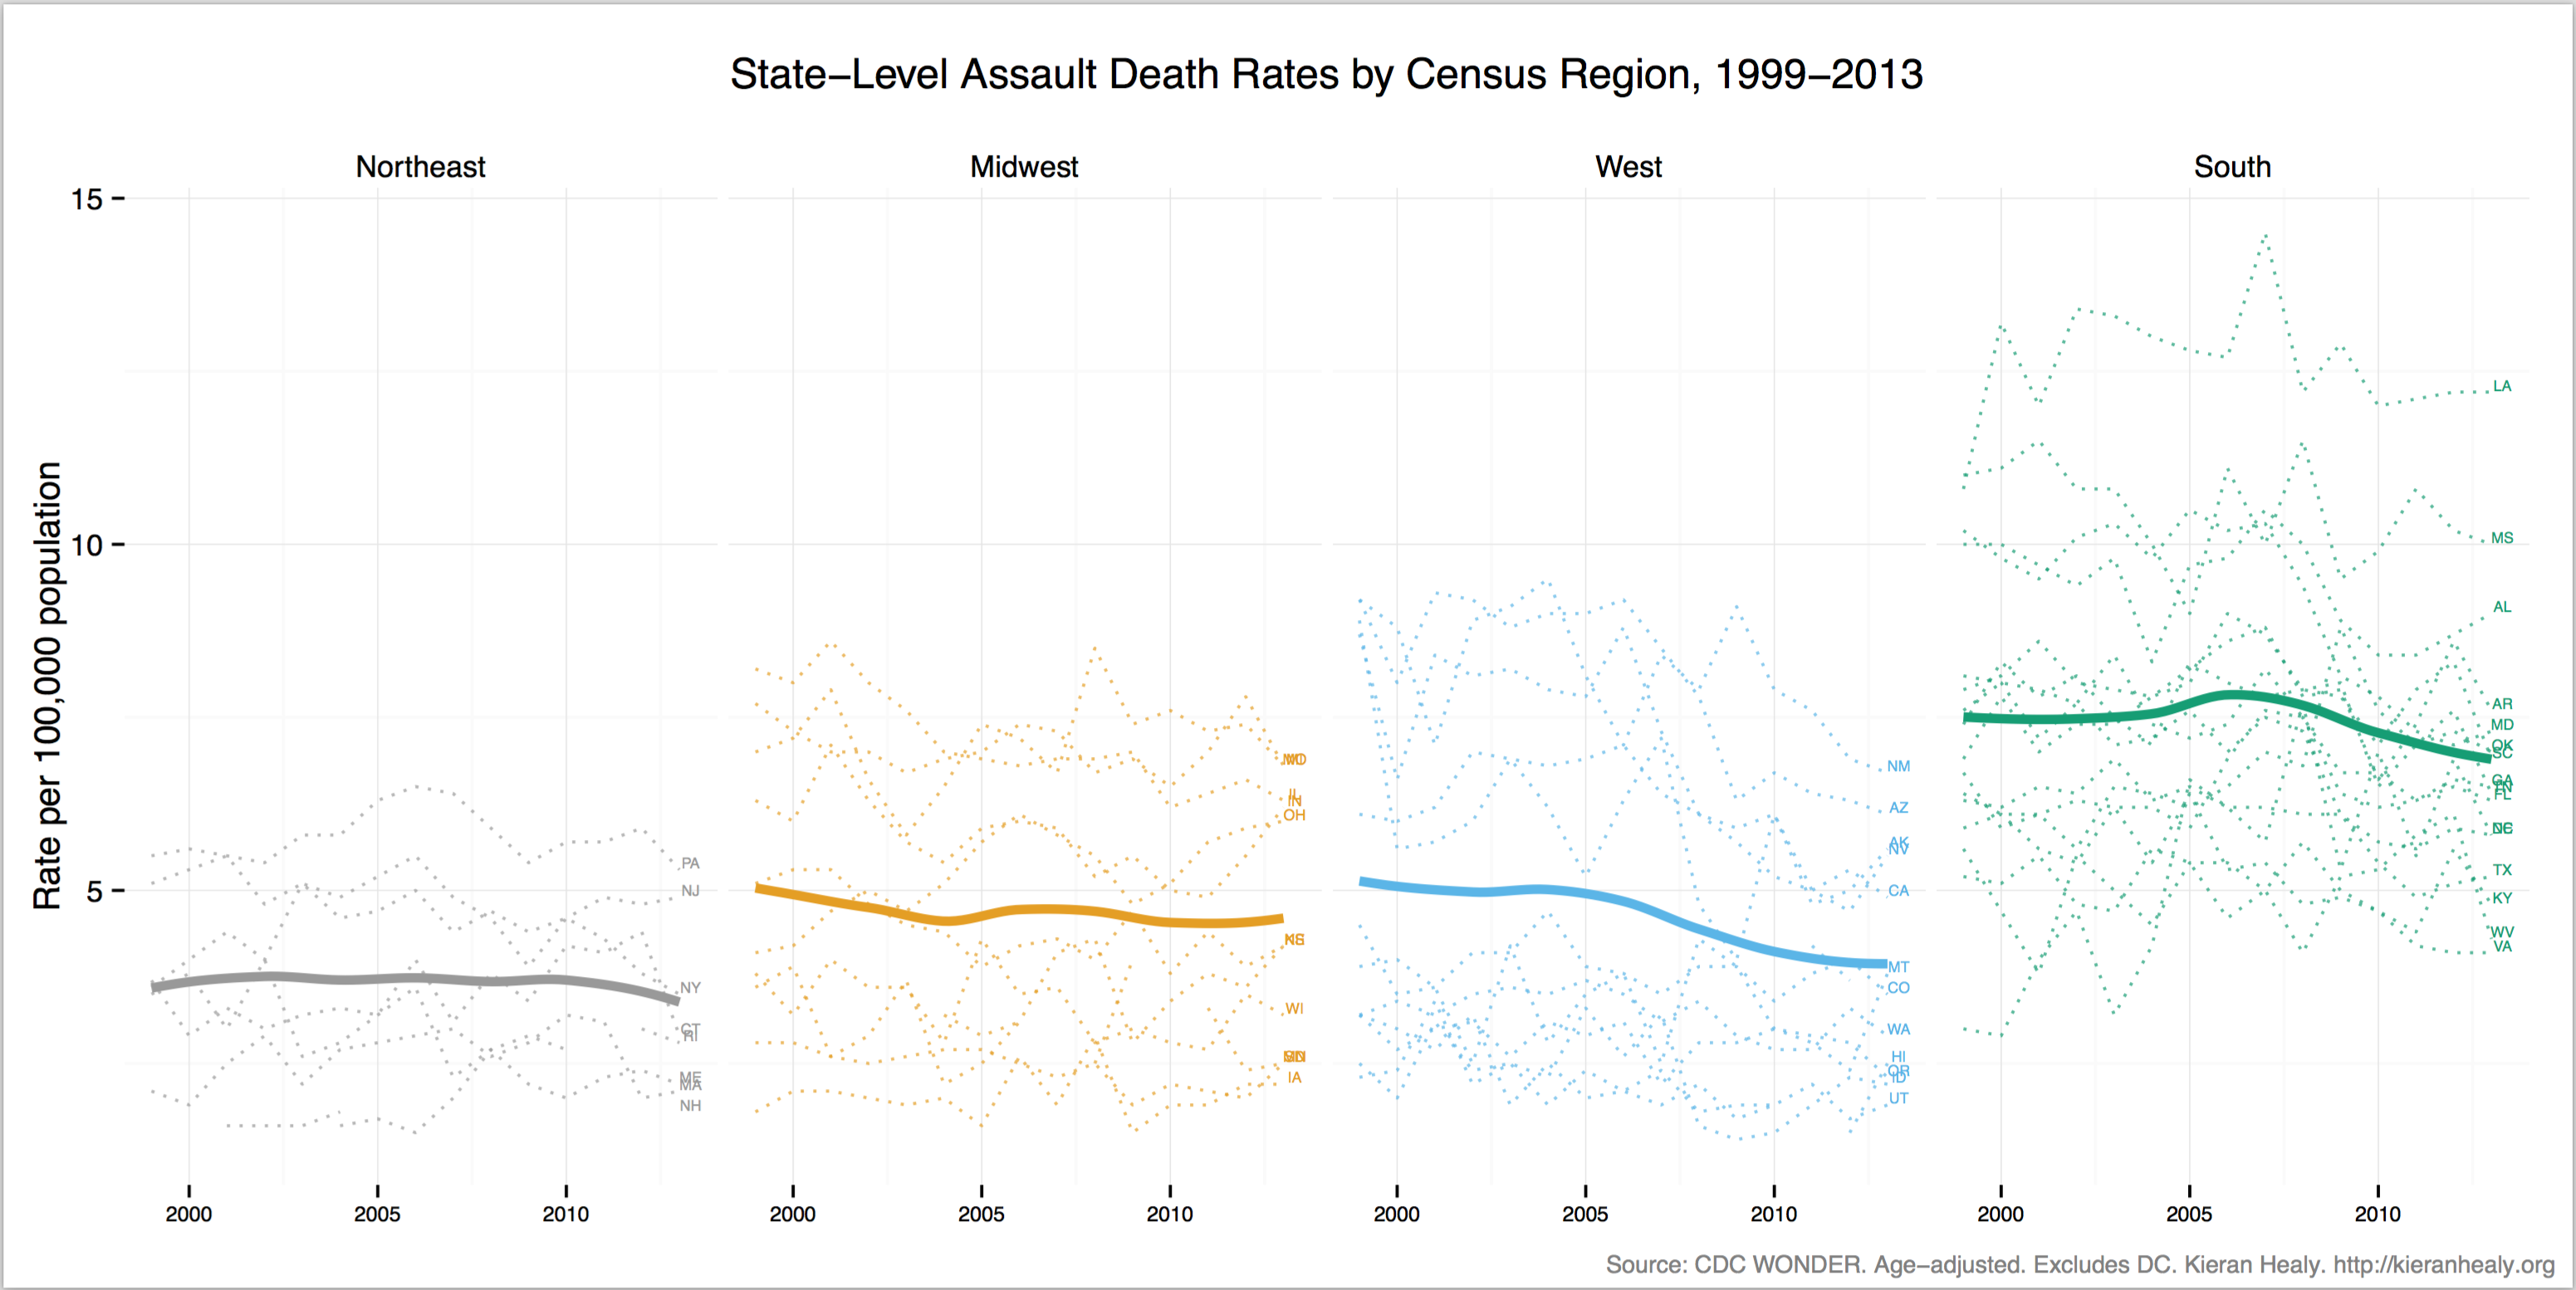 Assault Death rates in US States, by Census Region, 1999-2013.